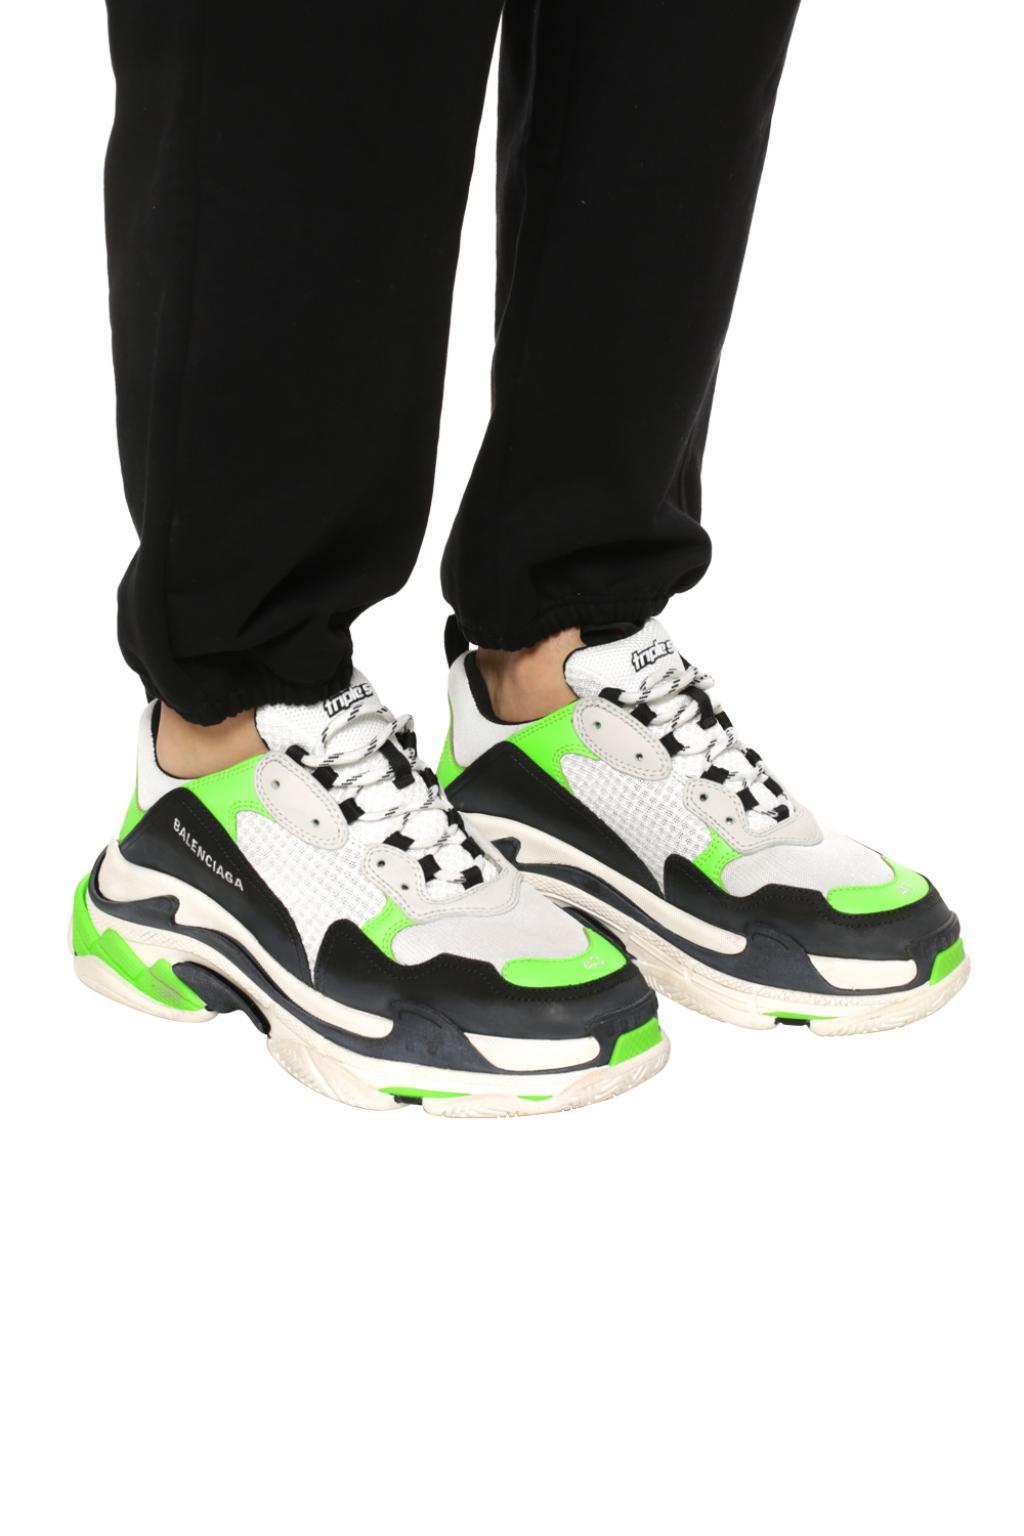 Balenciaga Triple S Mesh, Nubuck And Leather Sneakers in White / Neon Green  / Black (Green) for Men | Lyst